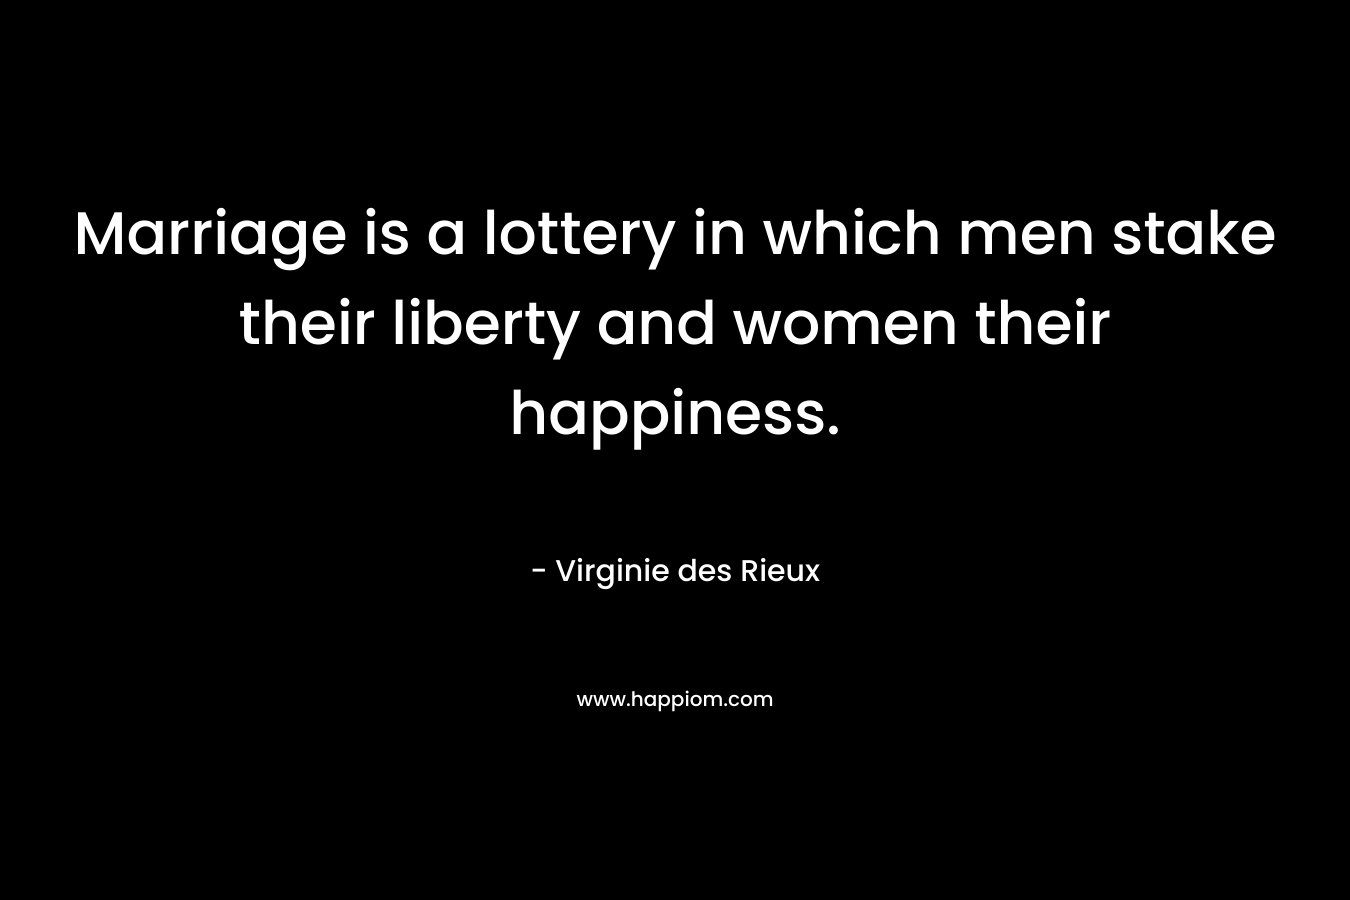 Marriage is a lottery in which men stake their liberty and women their happiness.